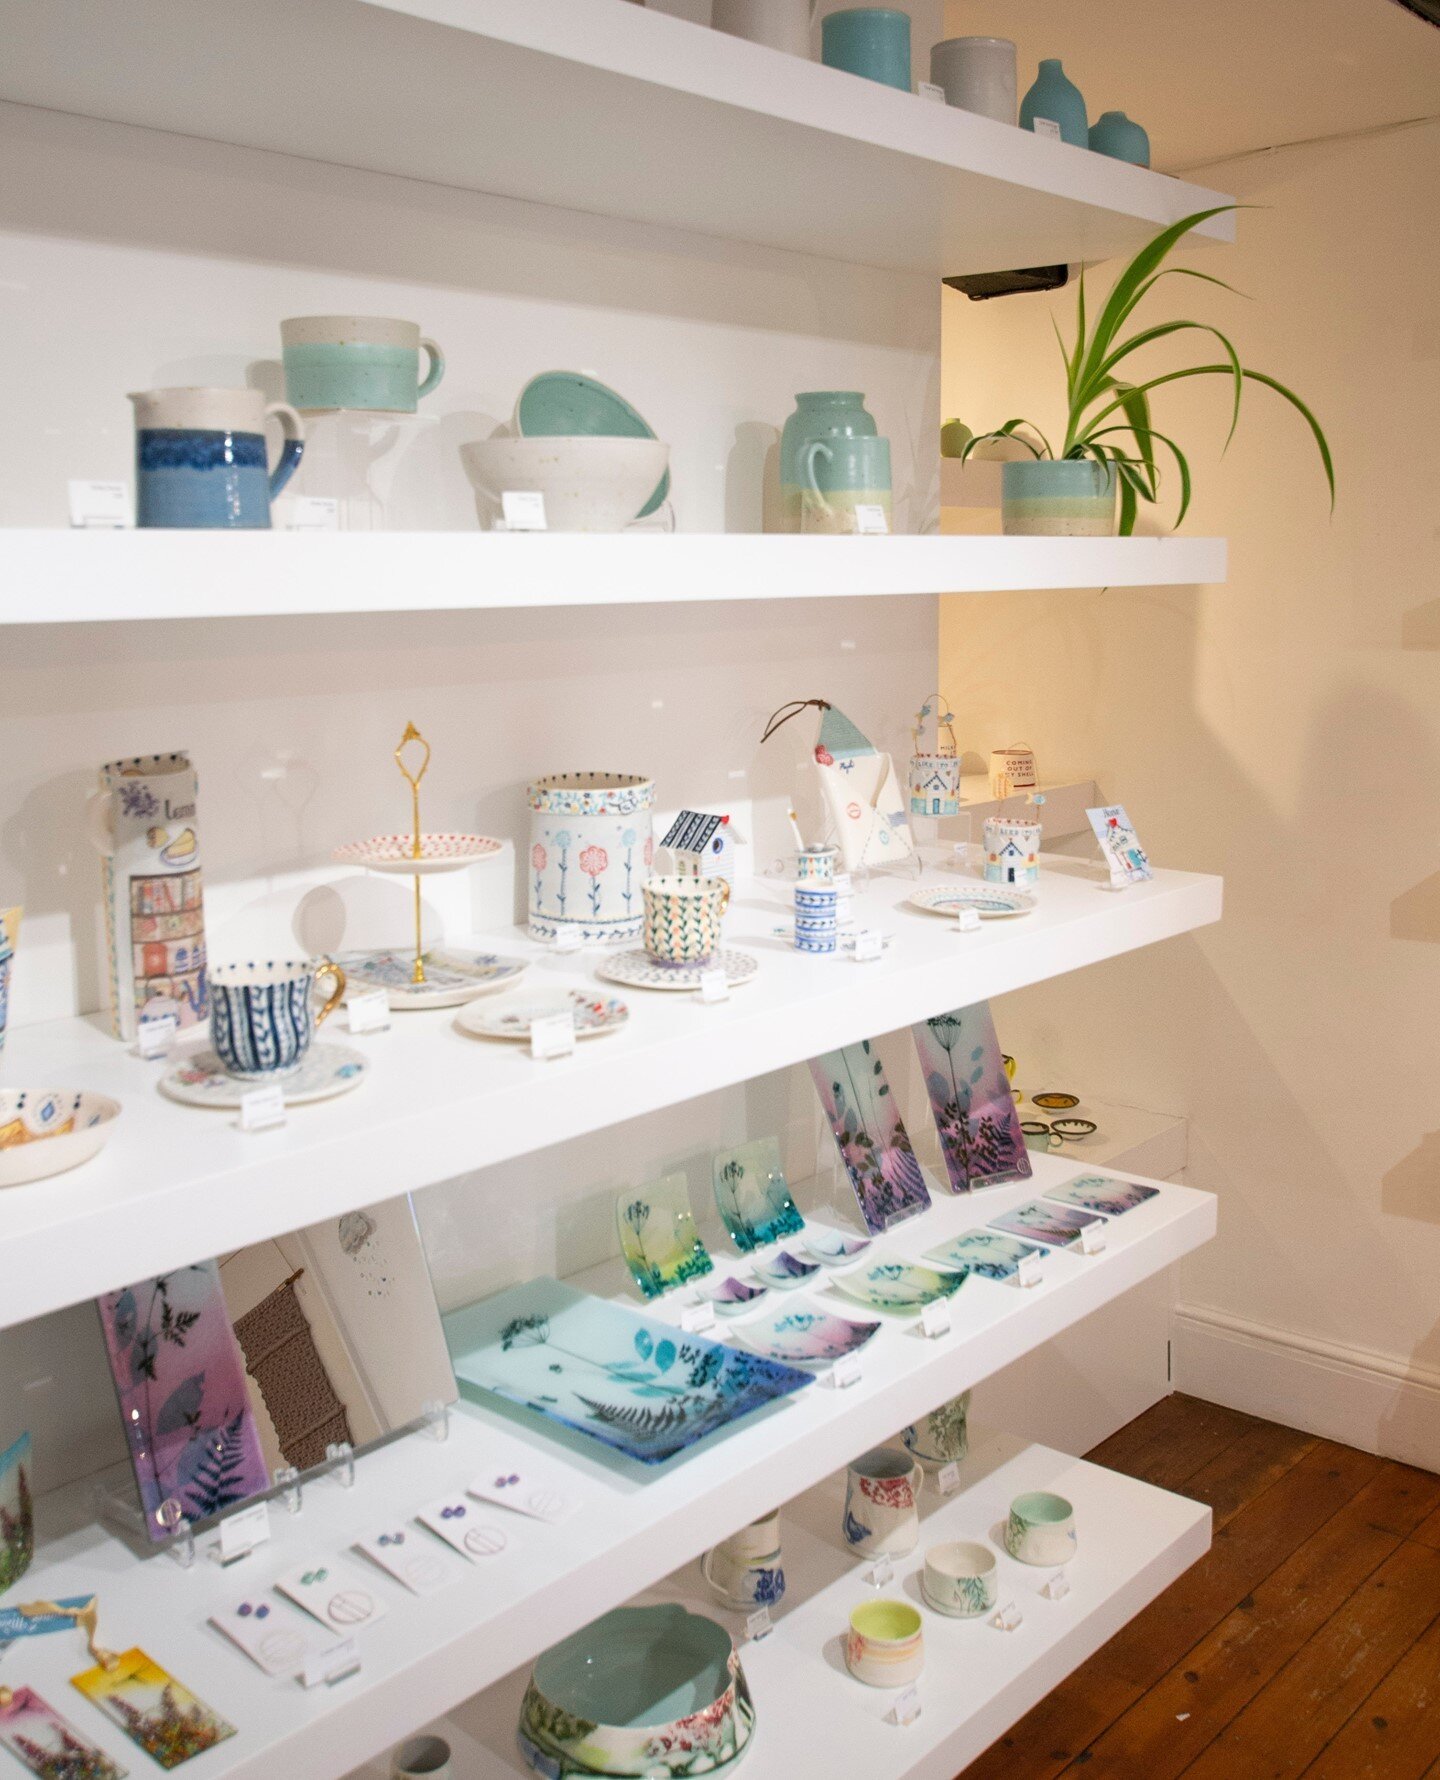 The gallery is full of beautiful work at the moment, including glass and ceramics... perfect for gifts for all the summer birthdays coming up! 🤩⁠
⁠
You can always shop online:⁠
www.cambridgecrafts.co.uk/⁠
⁠
⁠
⁠
#cambridge #lovecambridge #artgallery 